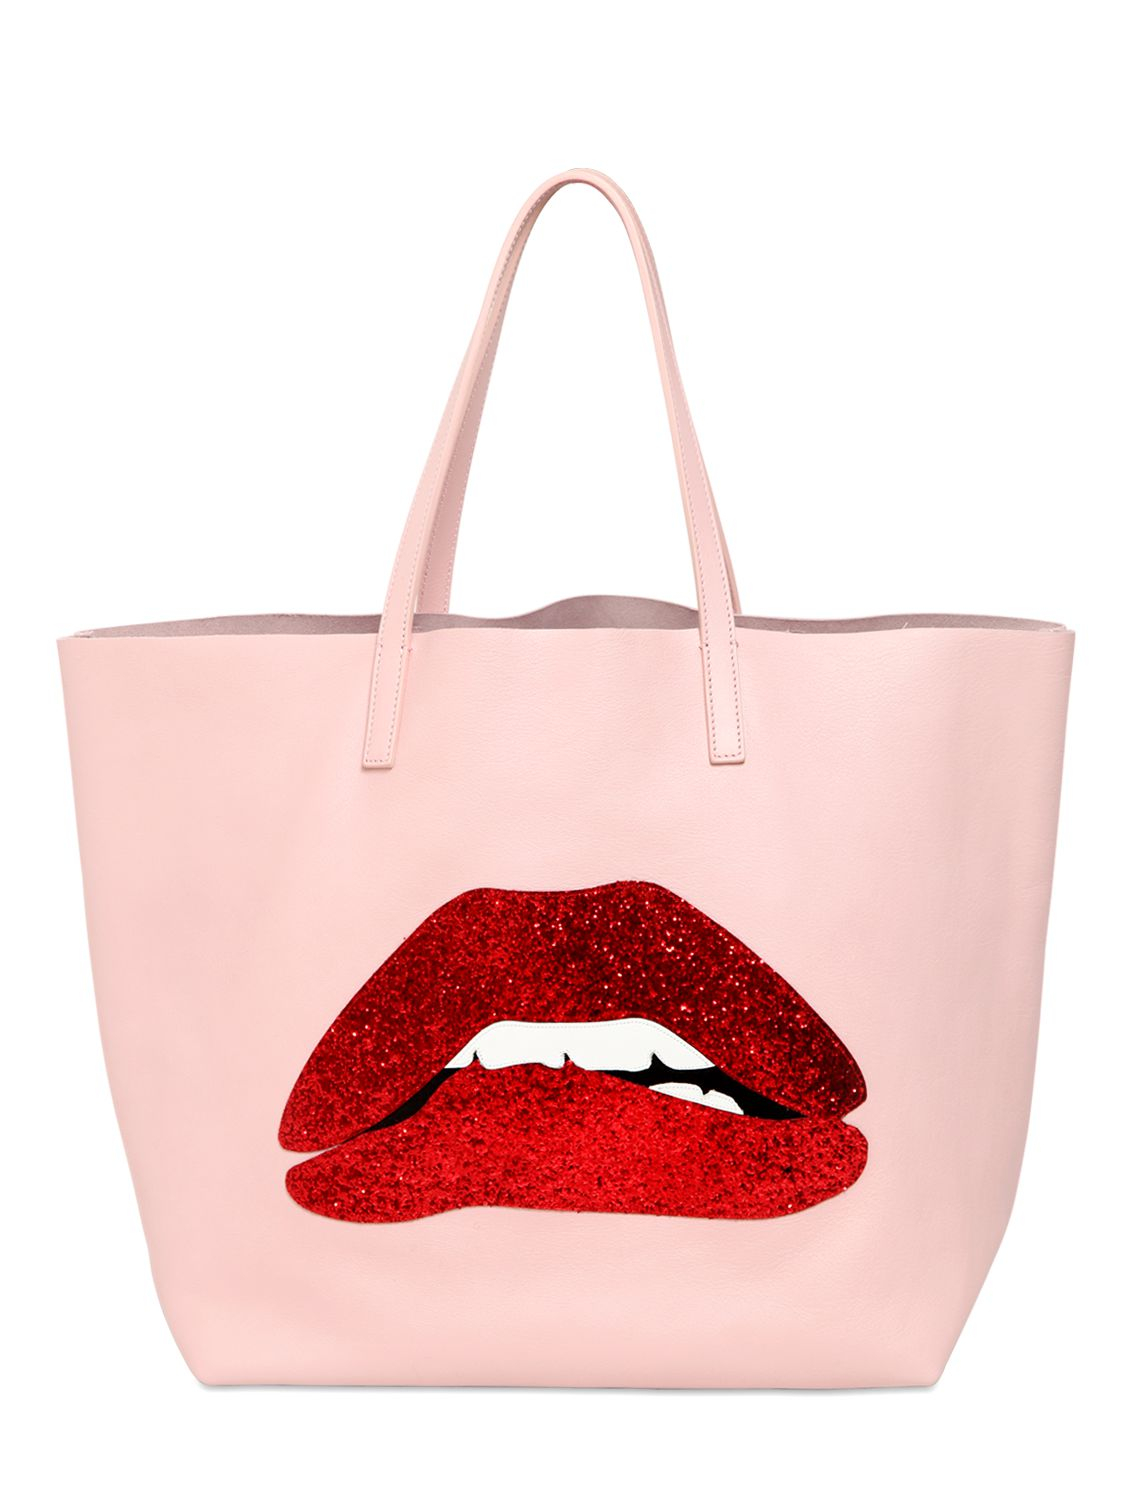 Red valentino Glitter Mouth Appliqué Leather Tote Bag in Pink | Lyst